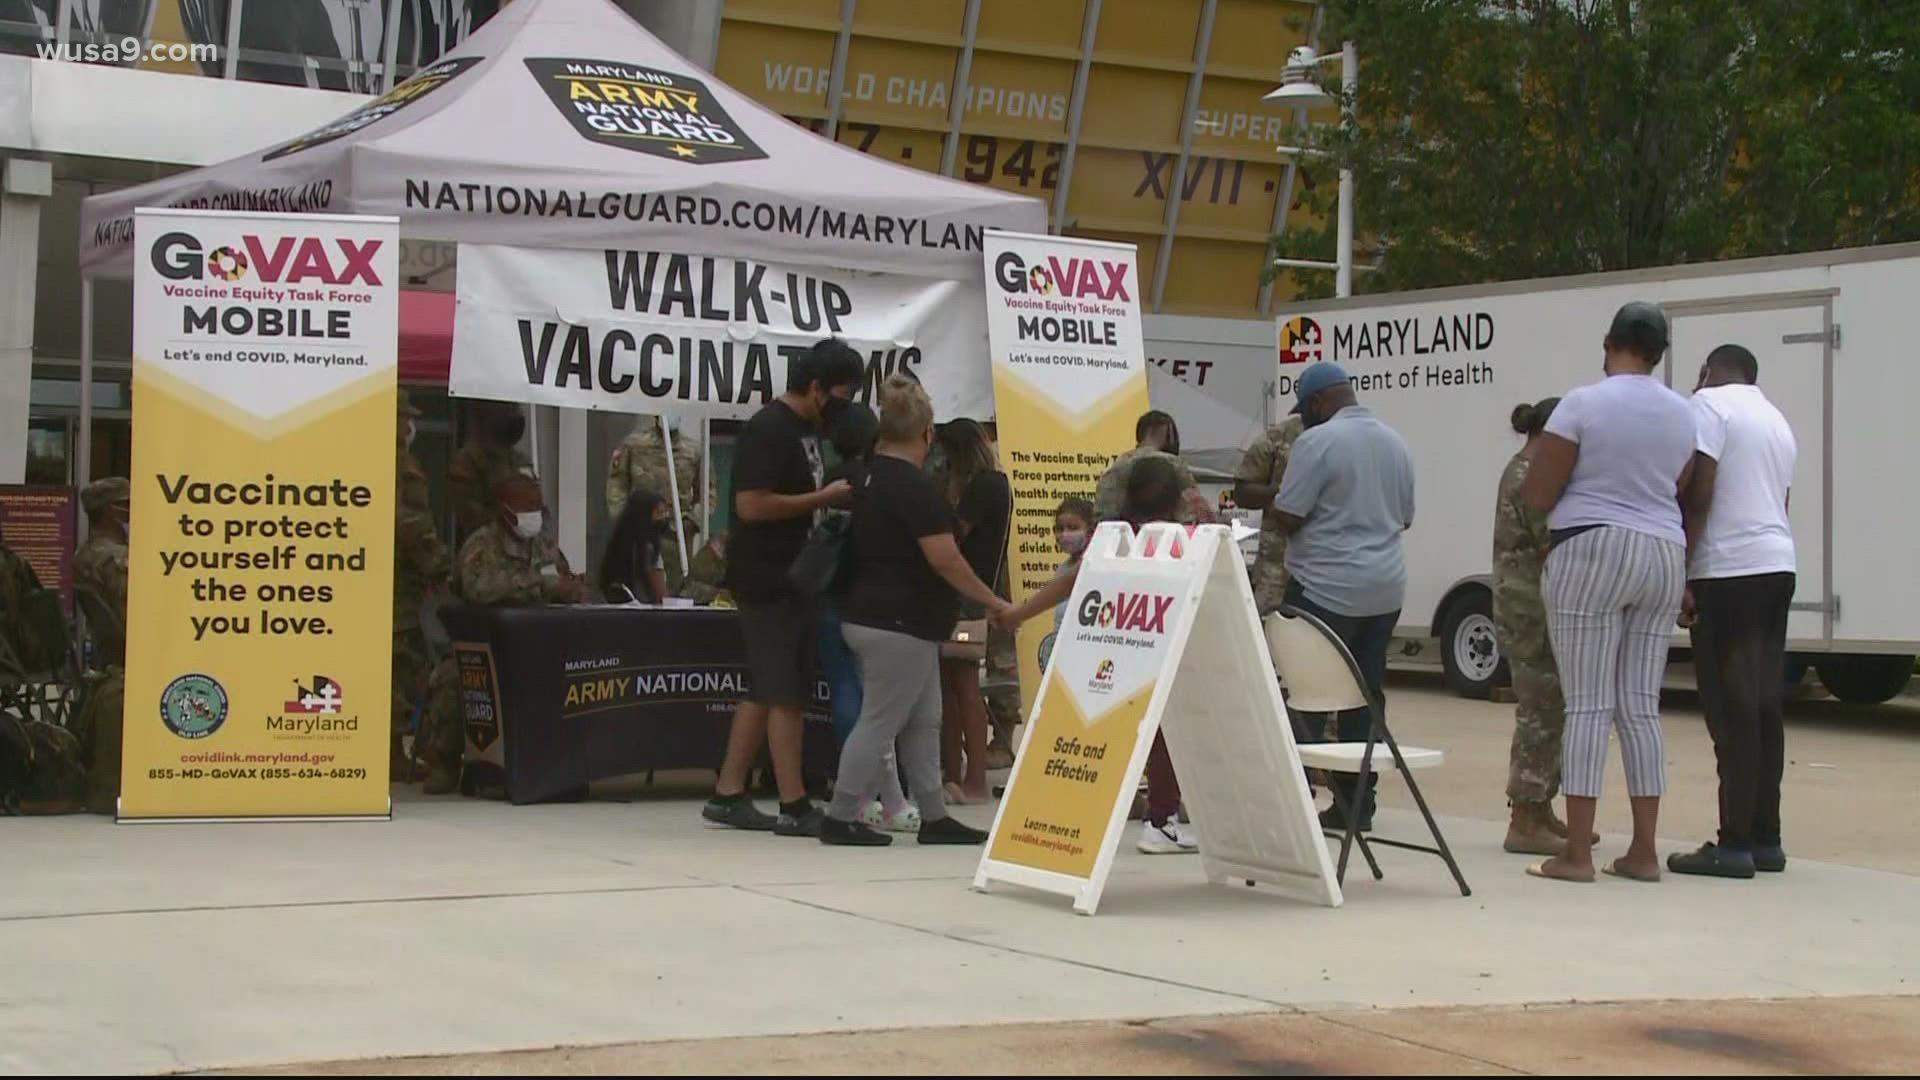 Members of the Prince George's County community were able to get free vaccines and school supplies.